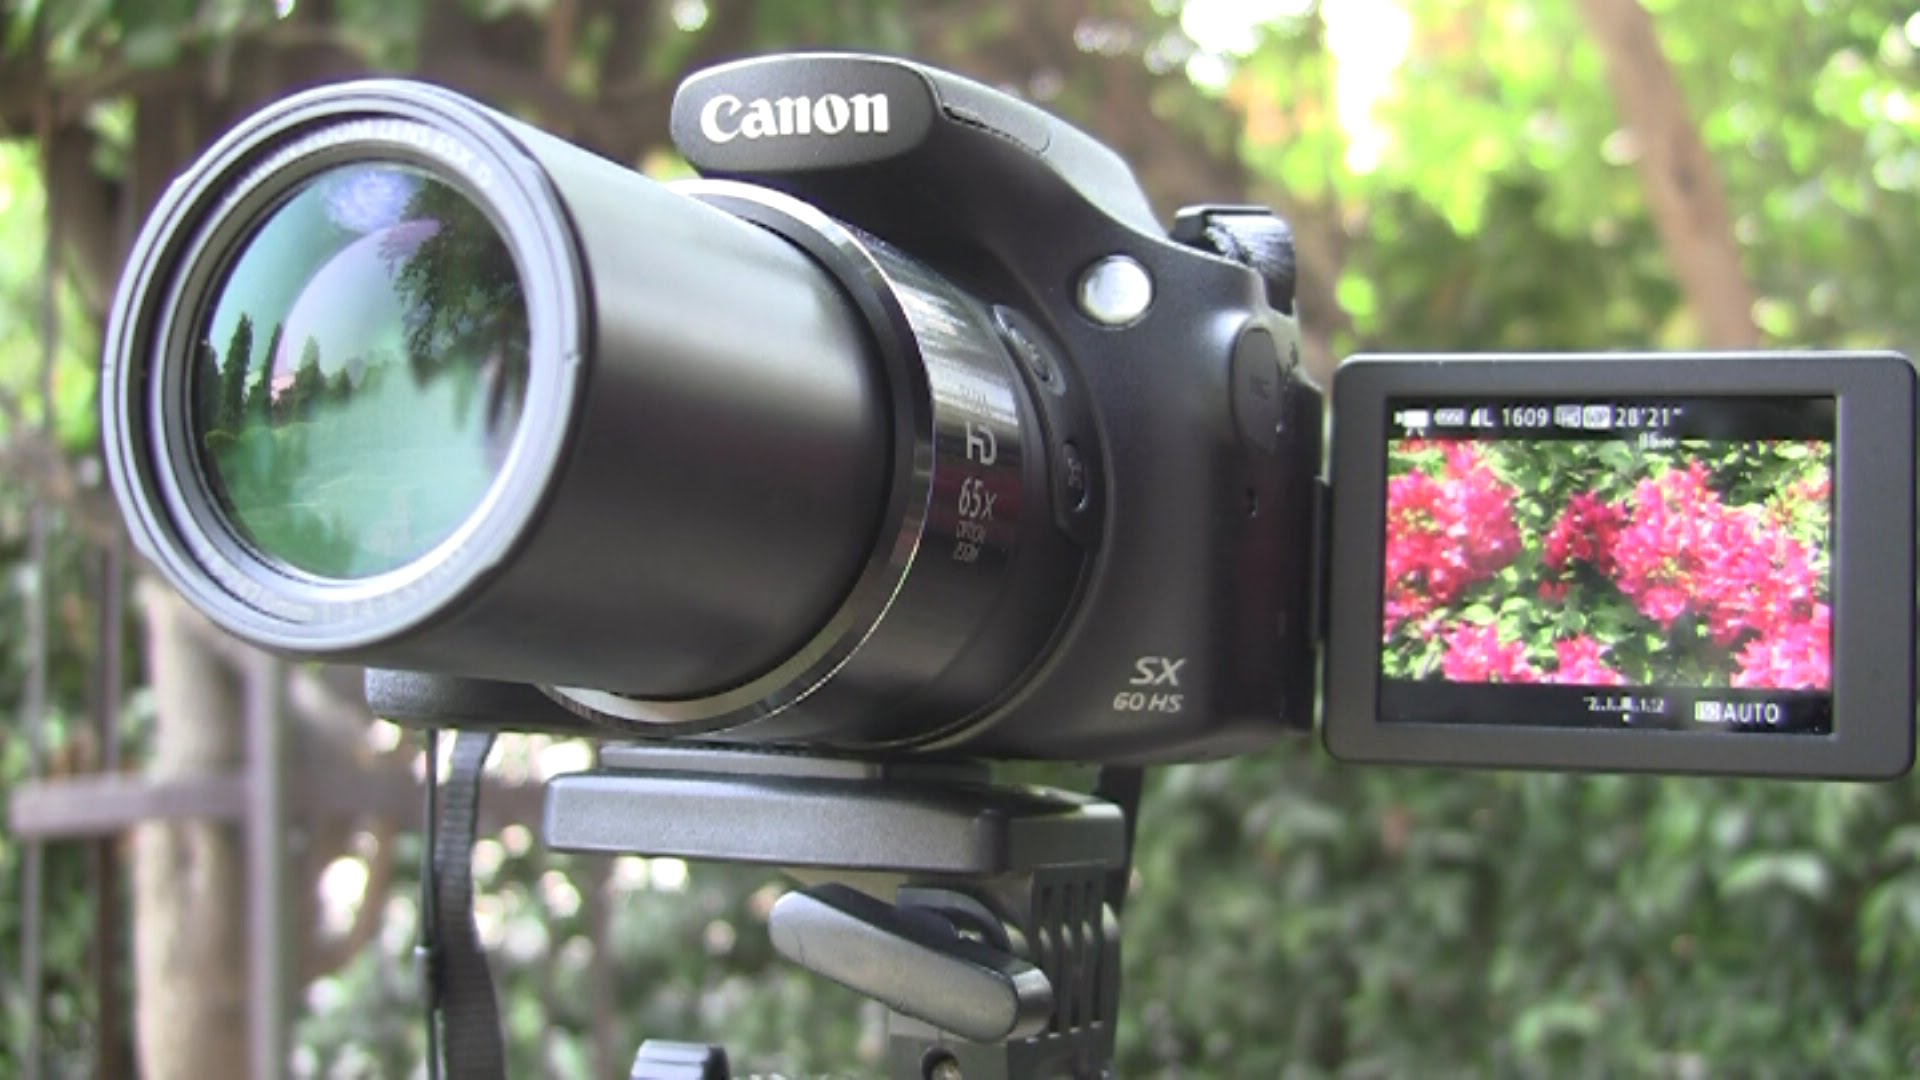 Canon SX60 HS Review – Macro and Video Capabilities demonstrated